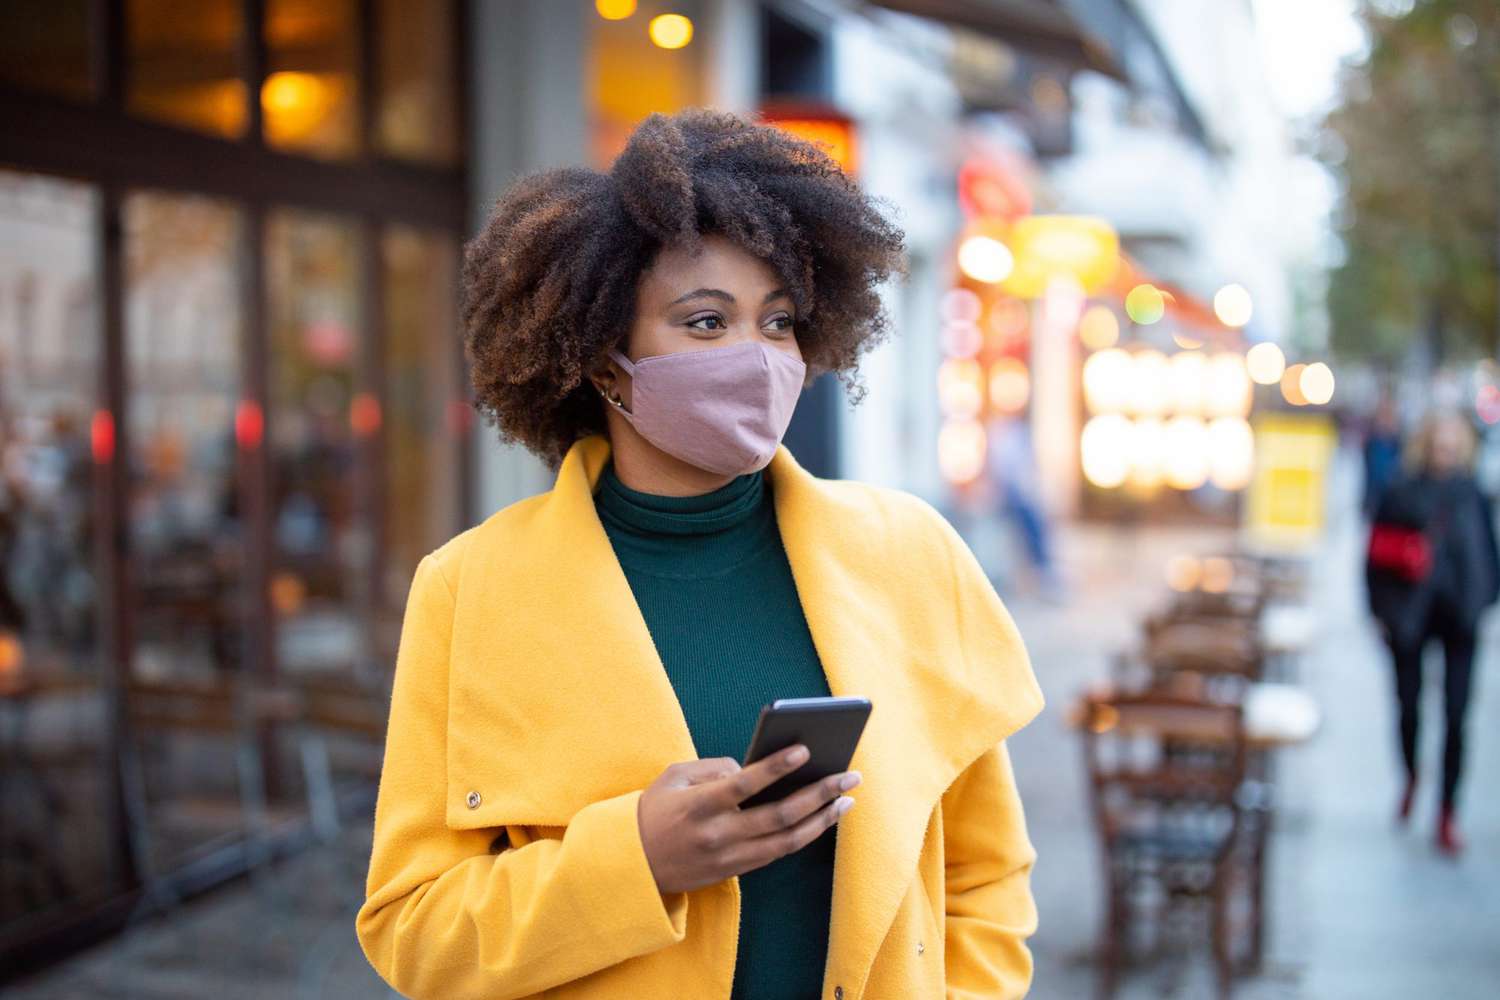 Woman in the city wearing face mask and holding cell phone